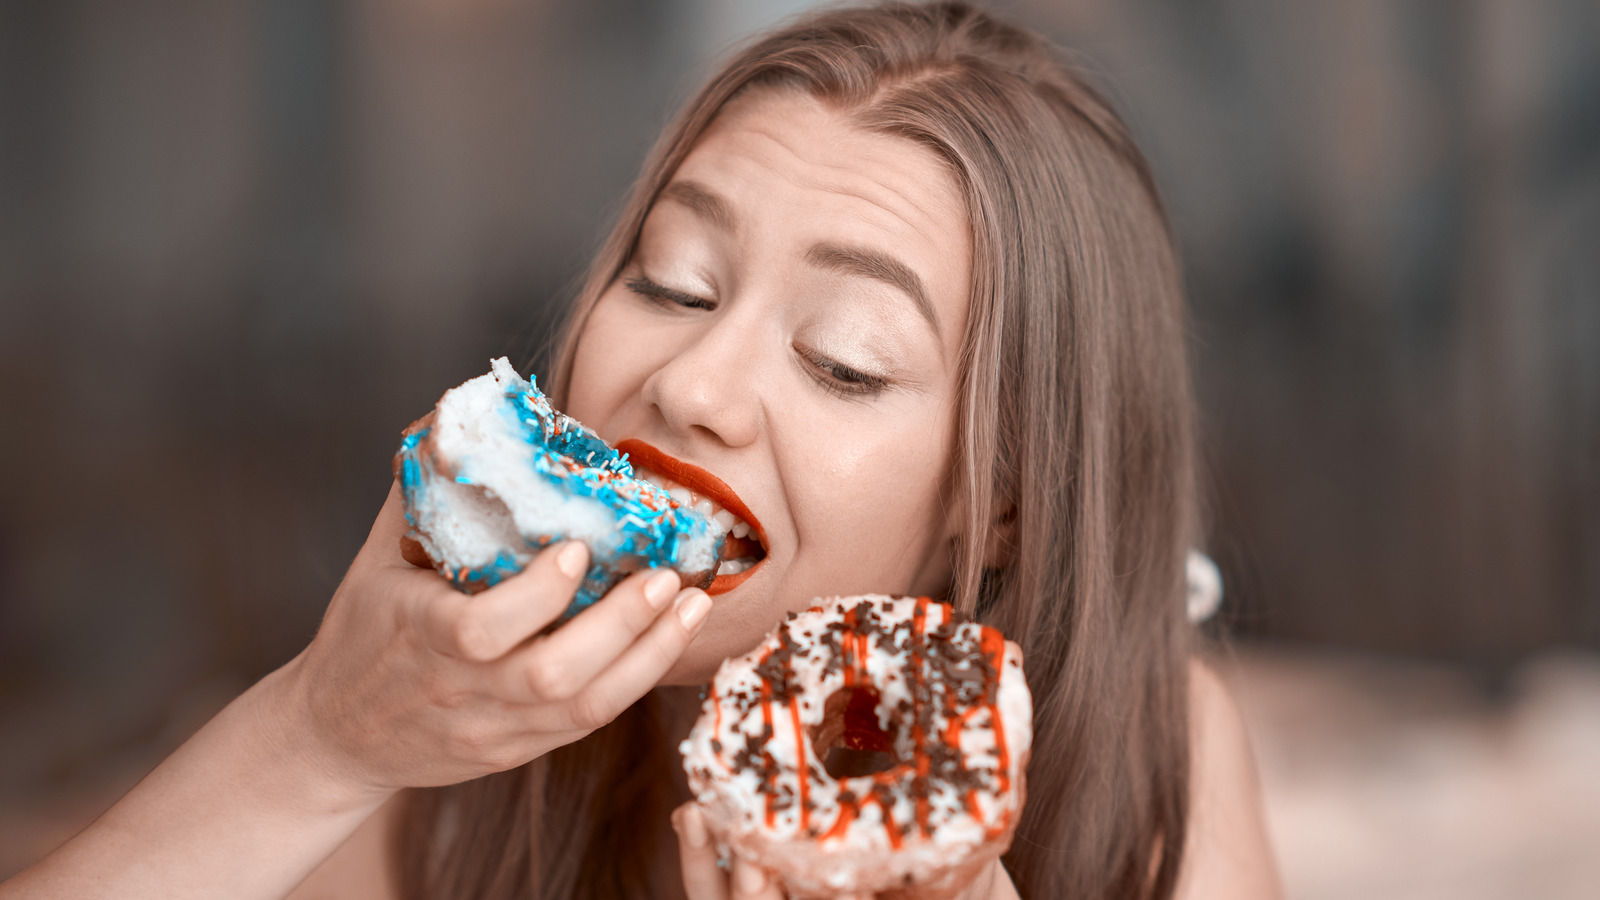 How Giving Into Your Craving Could Help Heal Your Relationship With Food